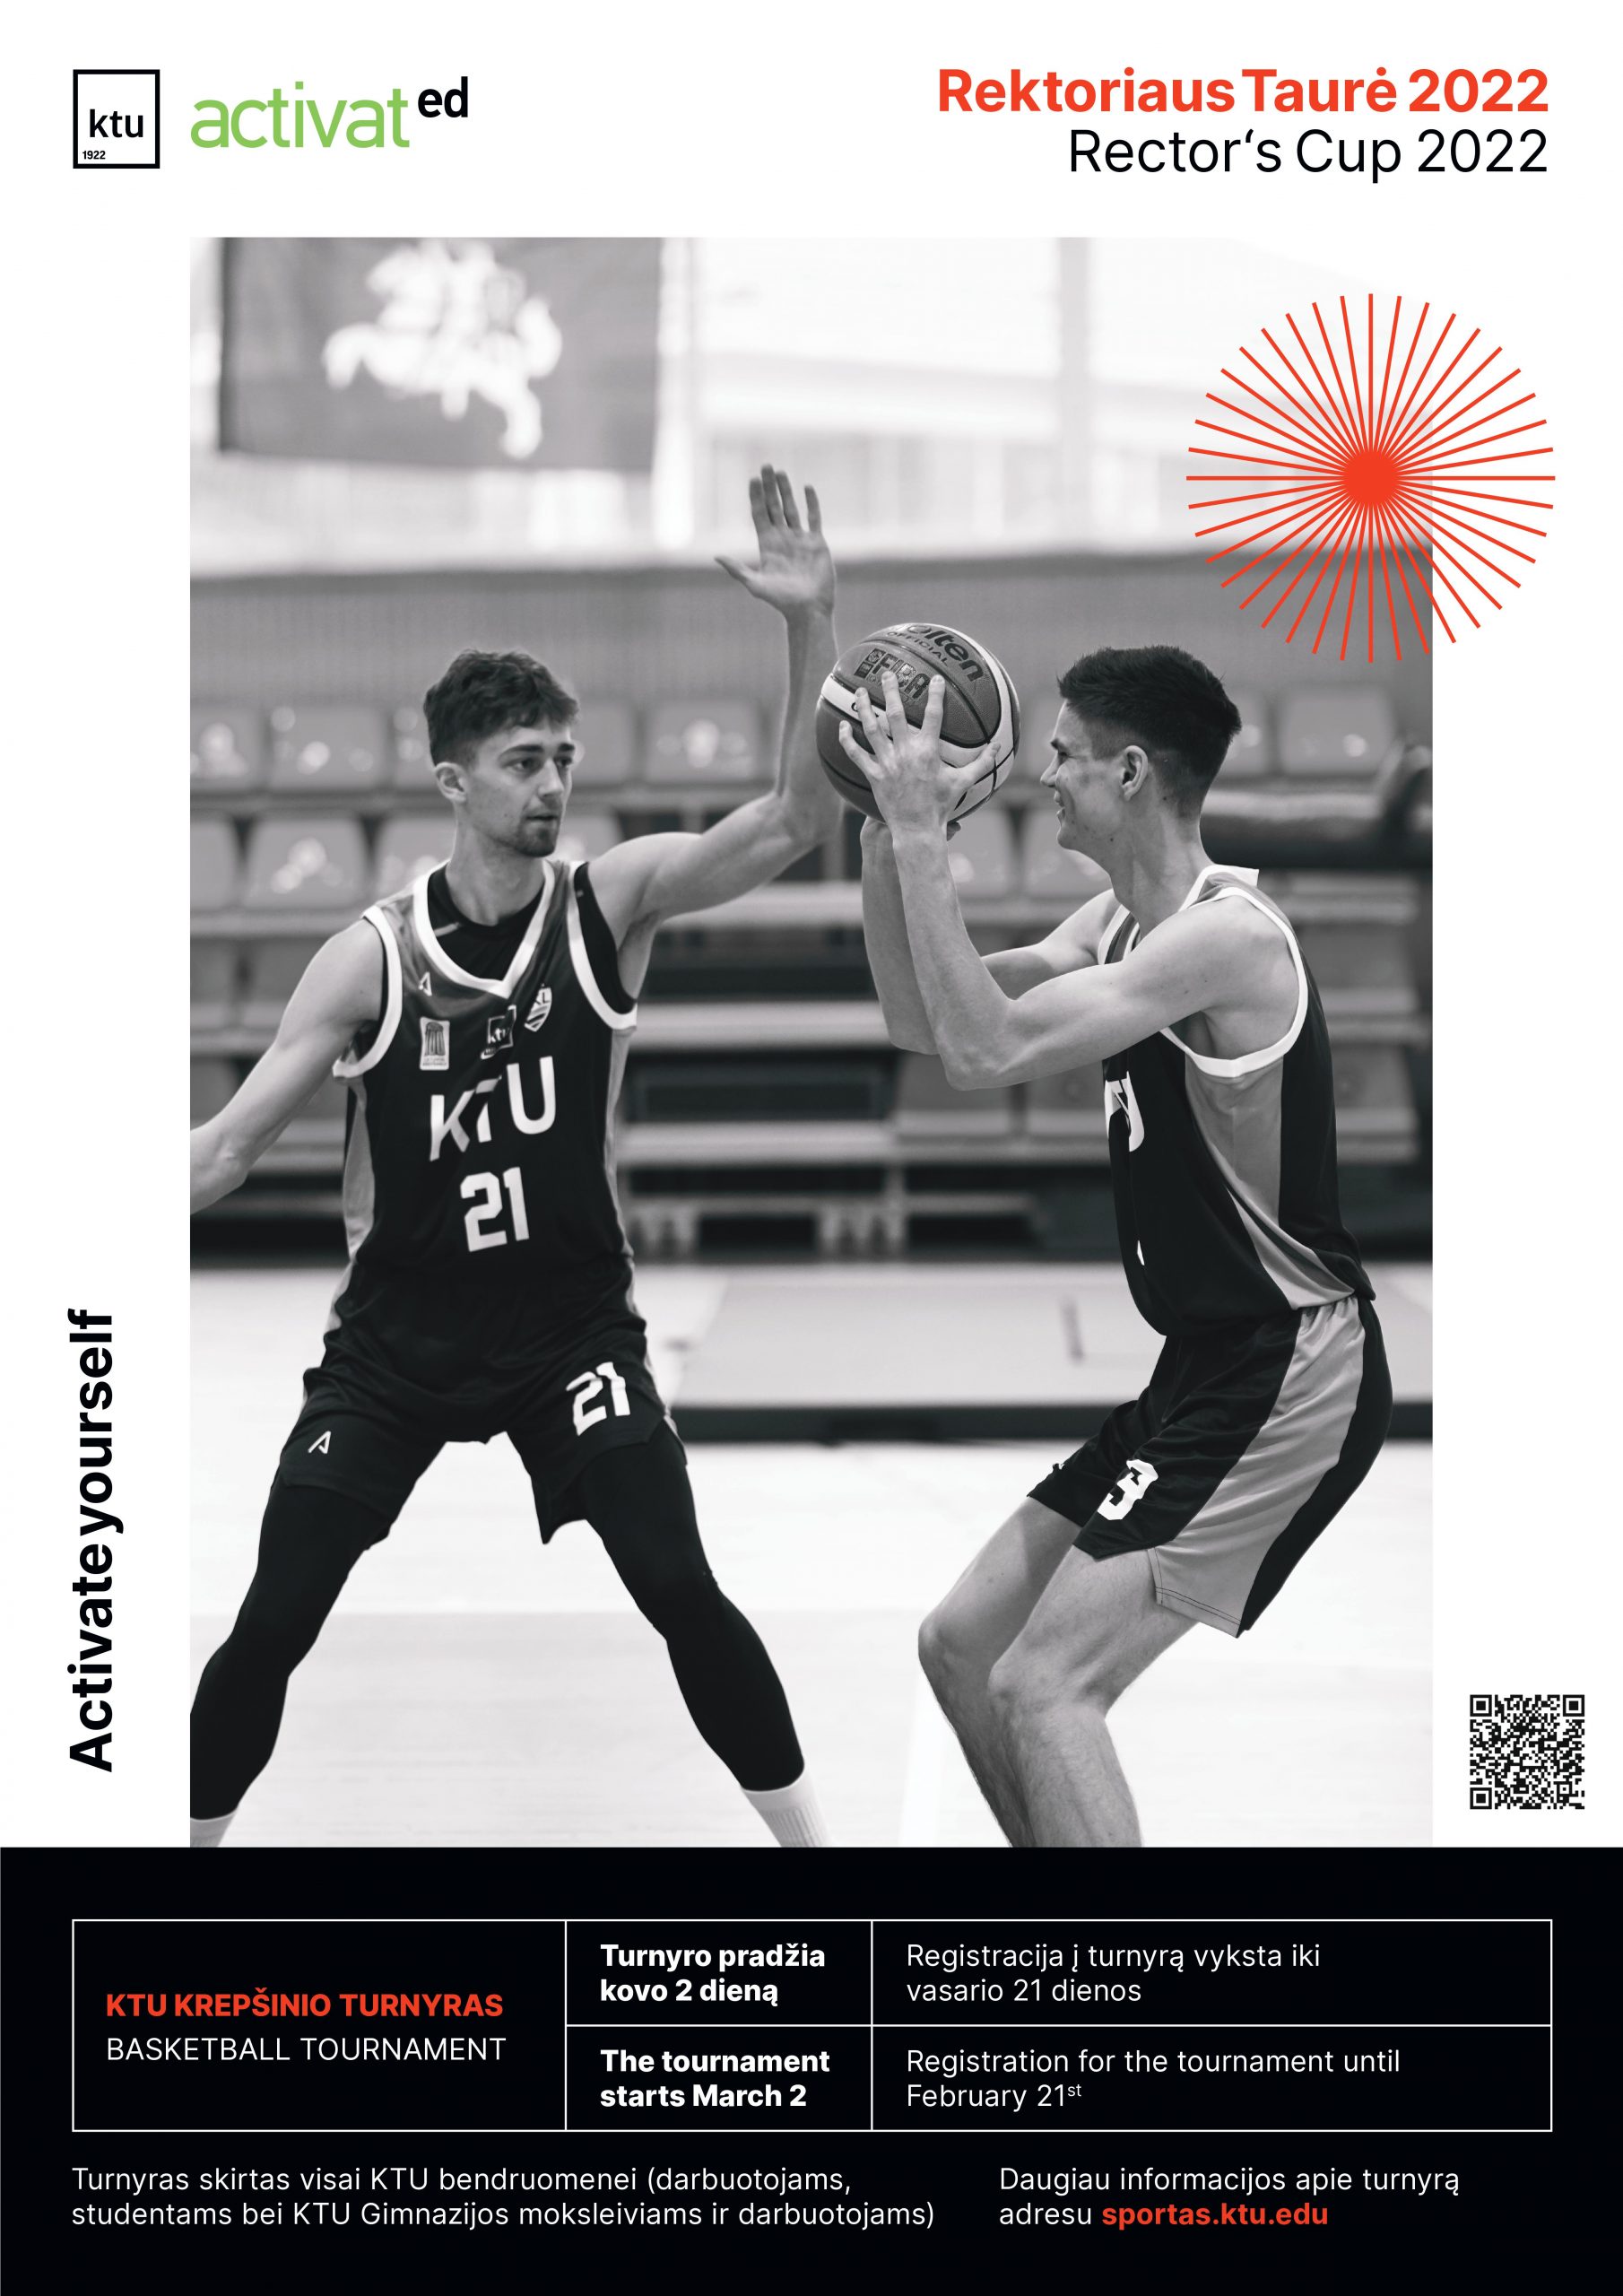 Rector's Cup 2022. KTU basketball tournament. The tournament starts March 2 Registration for the tournament until February 21st